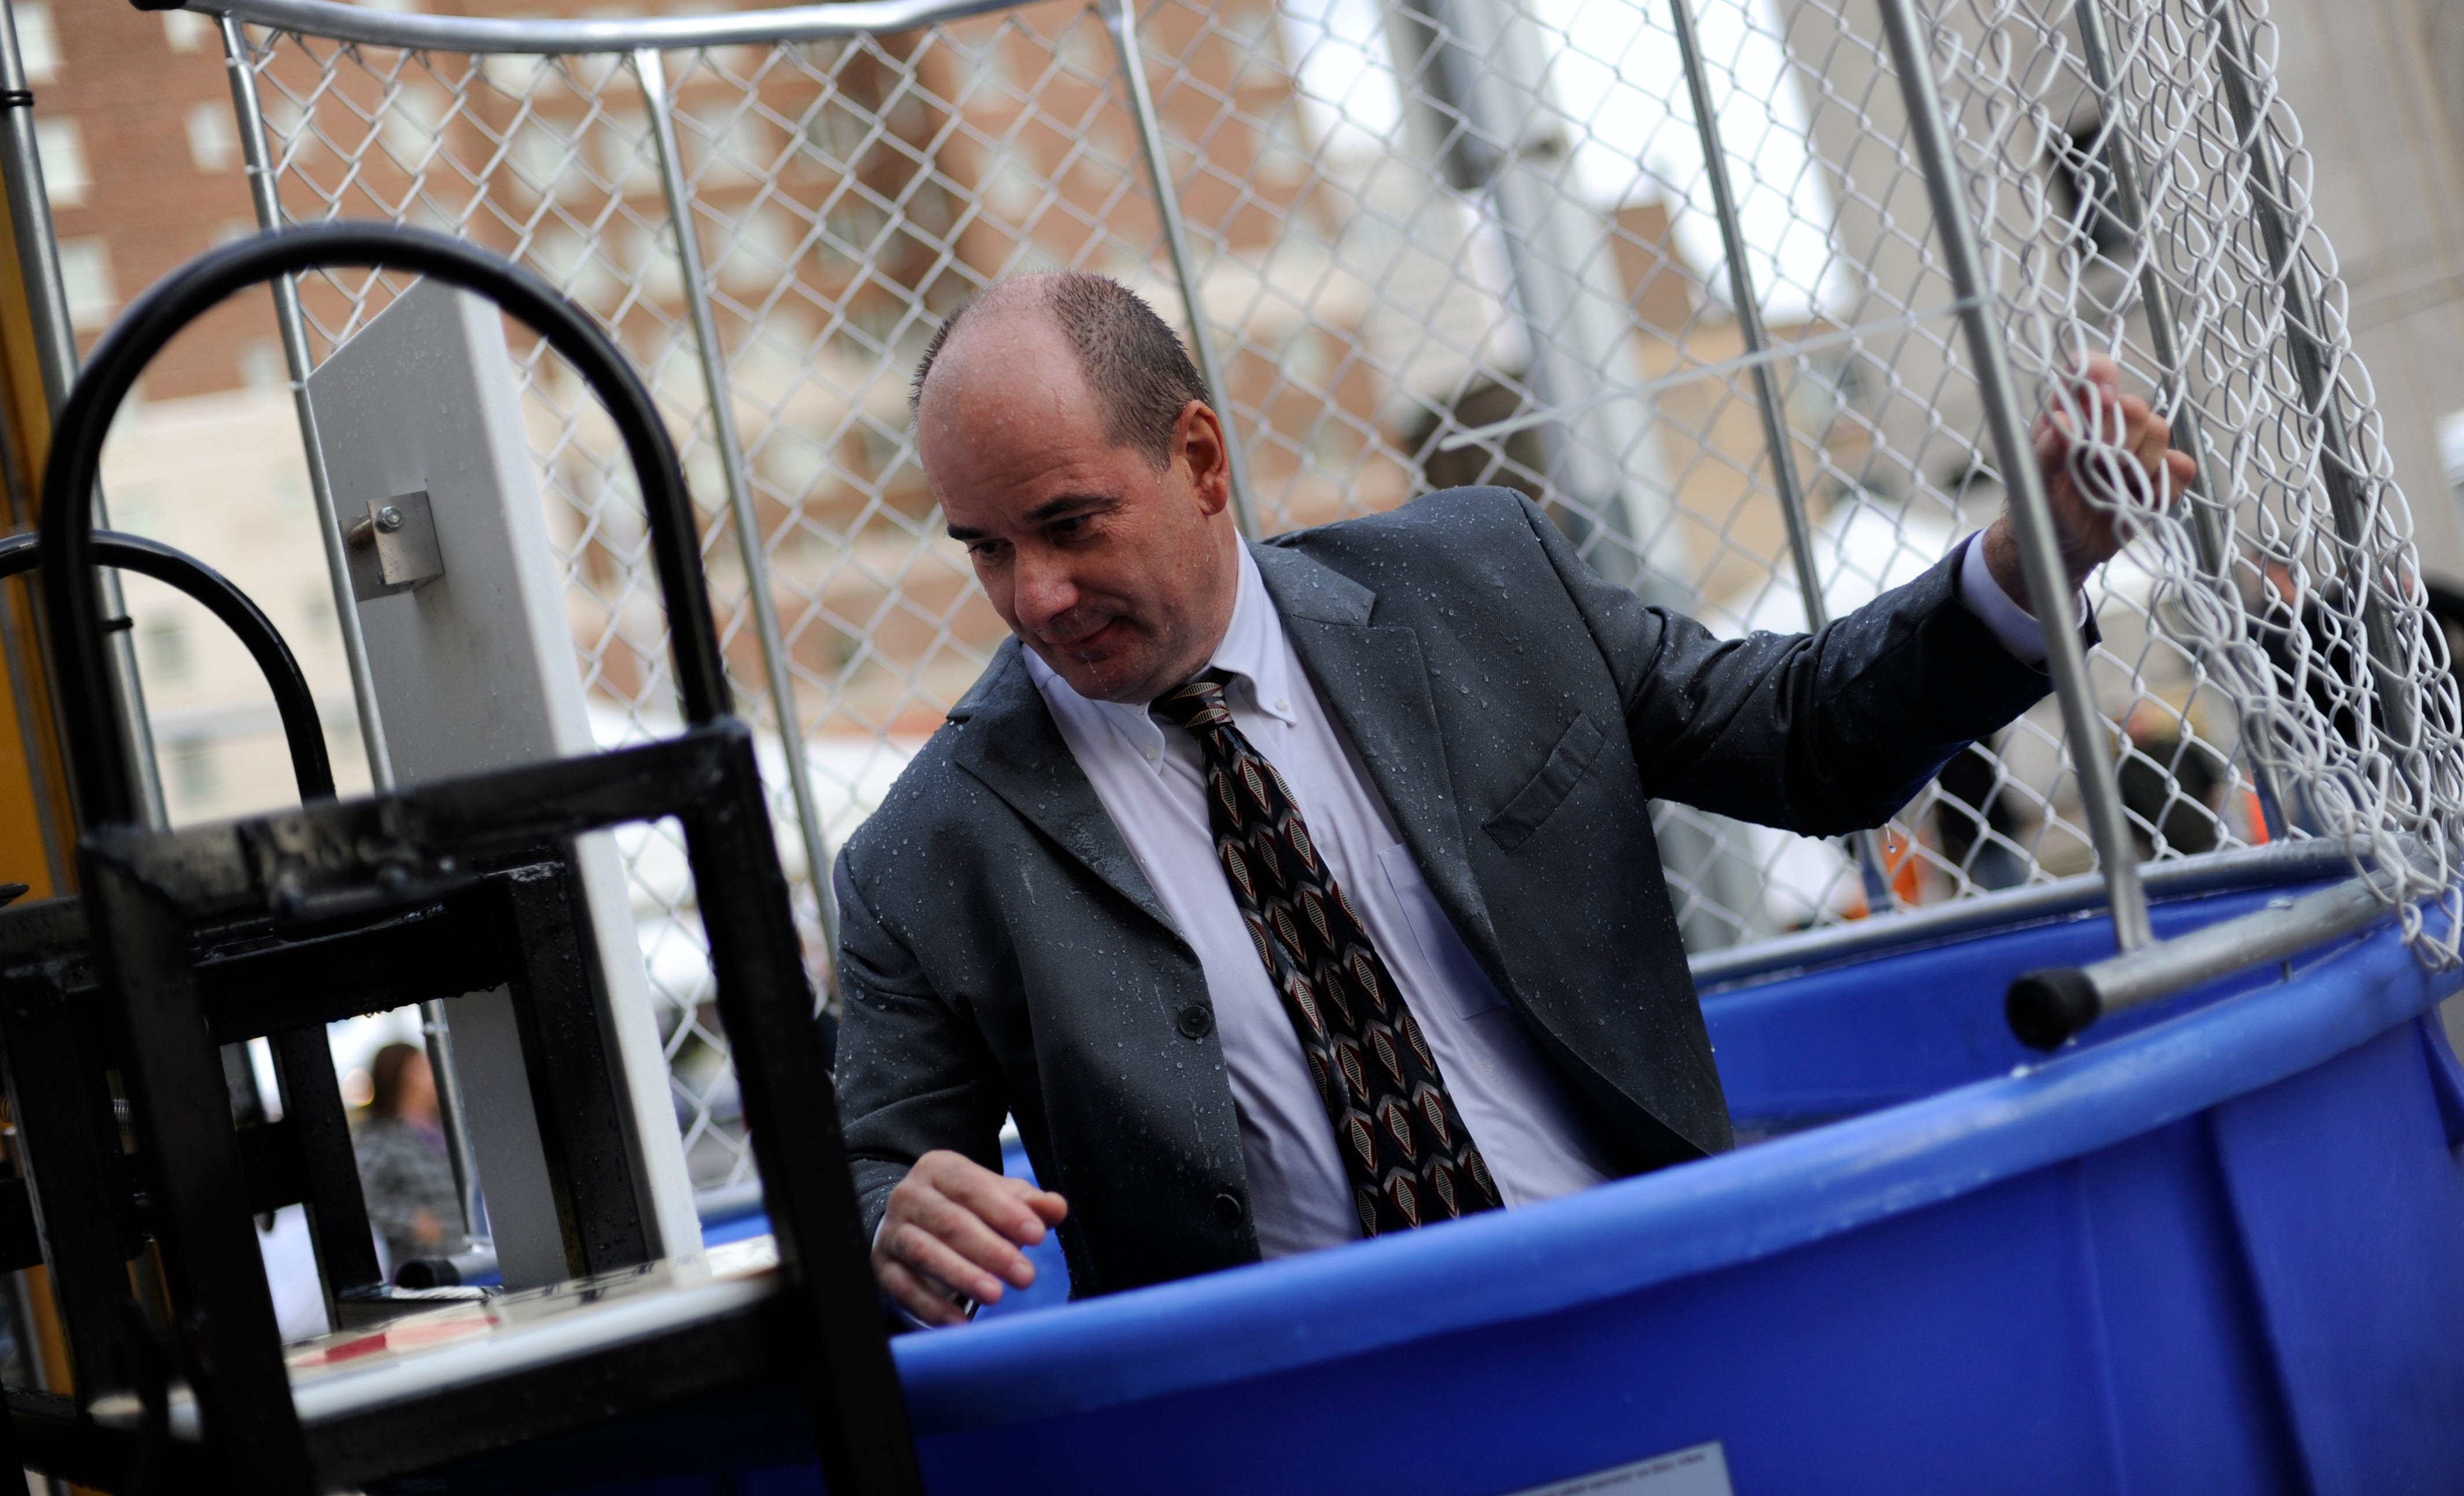 Nolan Finley gets wet in a dunk tank at Blocktoberfest, a fundraiser for the United Way in Downtown Detroit on Oct. 13, 2009.